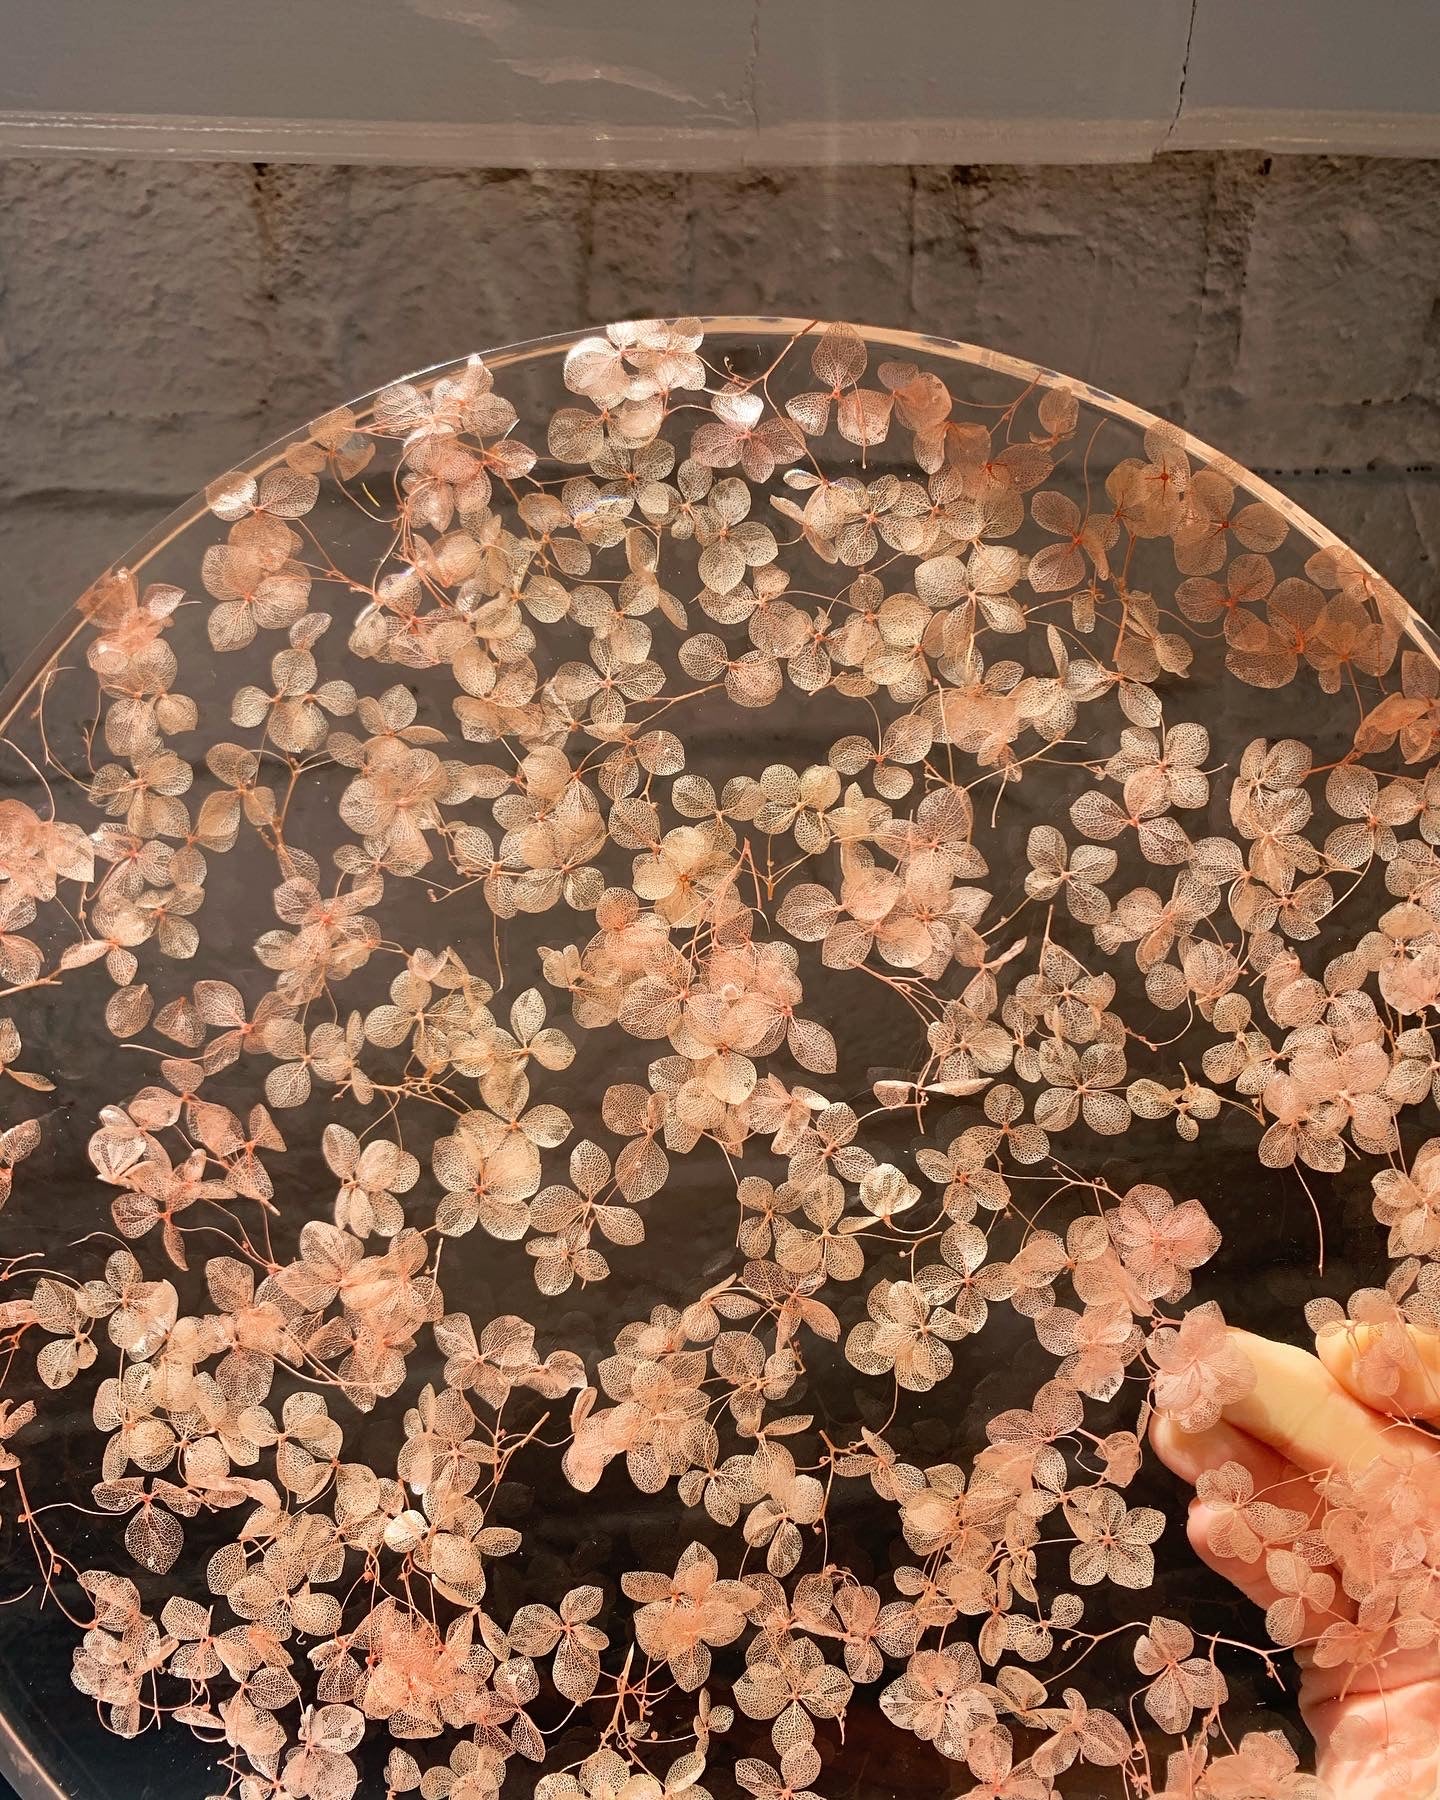 Hundreds of rosy hydrangeas sit suspended in transparent resin. A durable-yet-whimsical addition to your home decor. Serve cocktails, use as a vanity tray, or simply display as an incredible objet d'art.